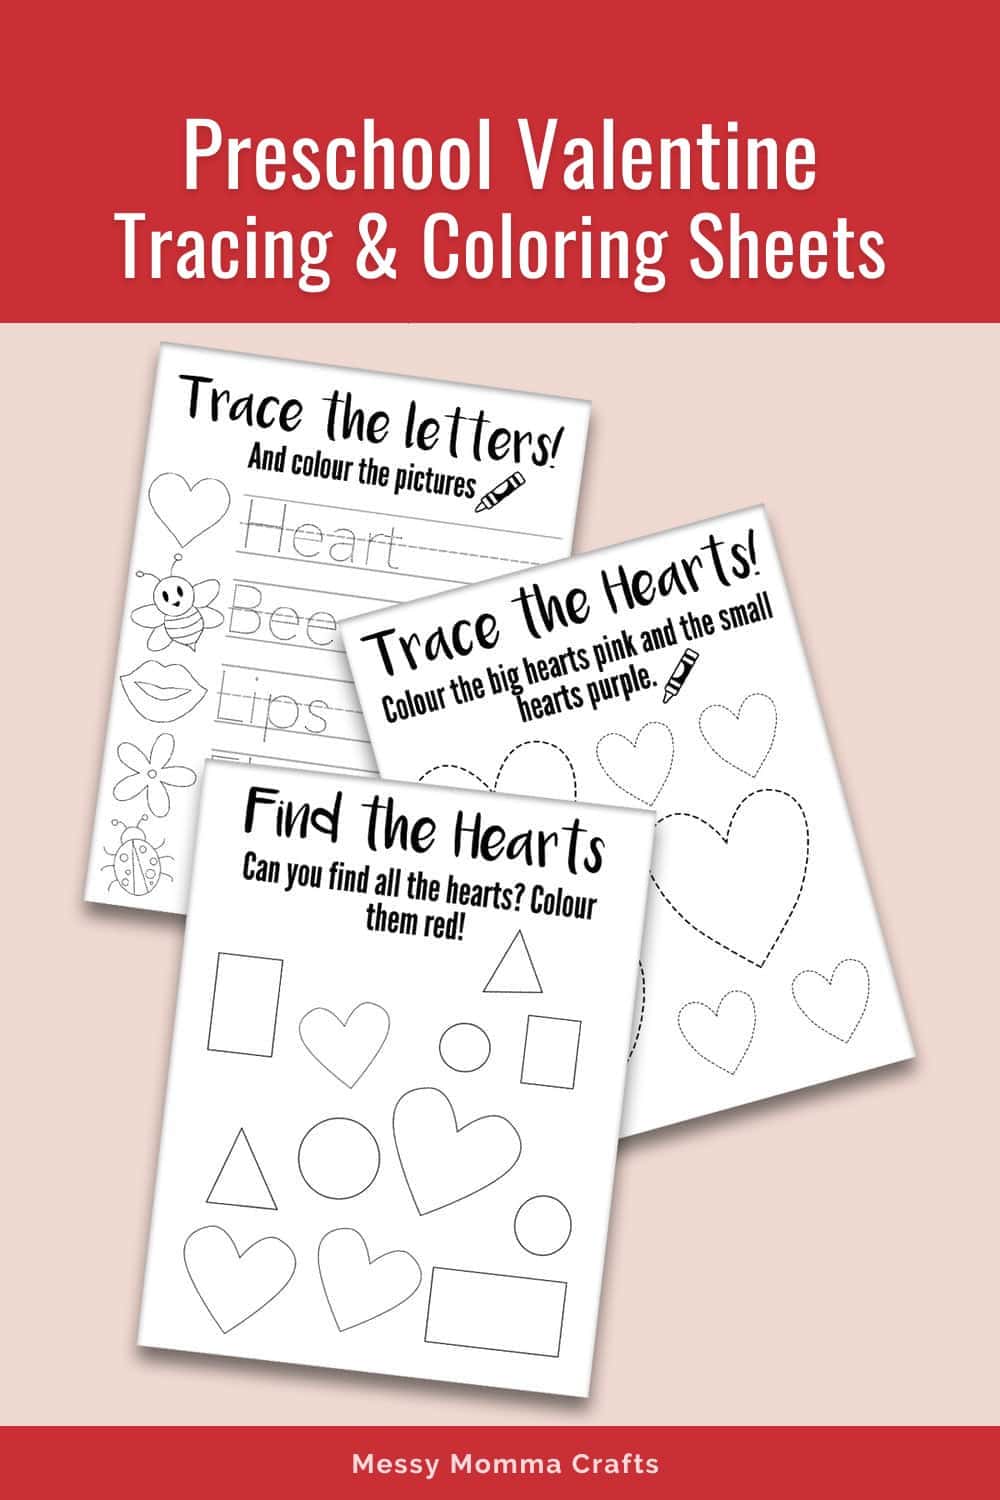 3 Preschool Valentine tracing and coloring sheets.